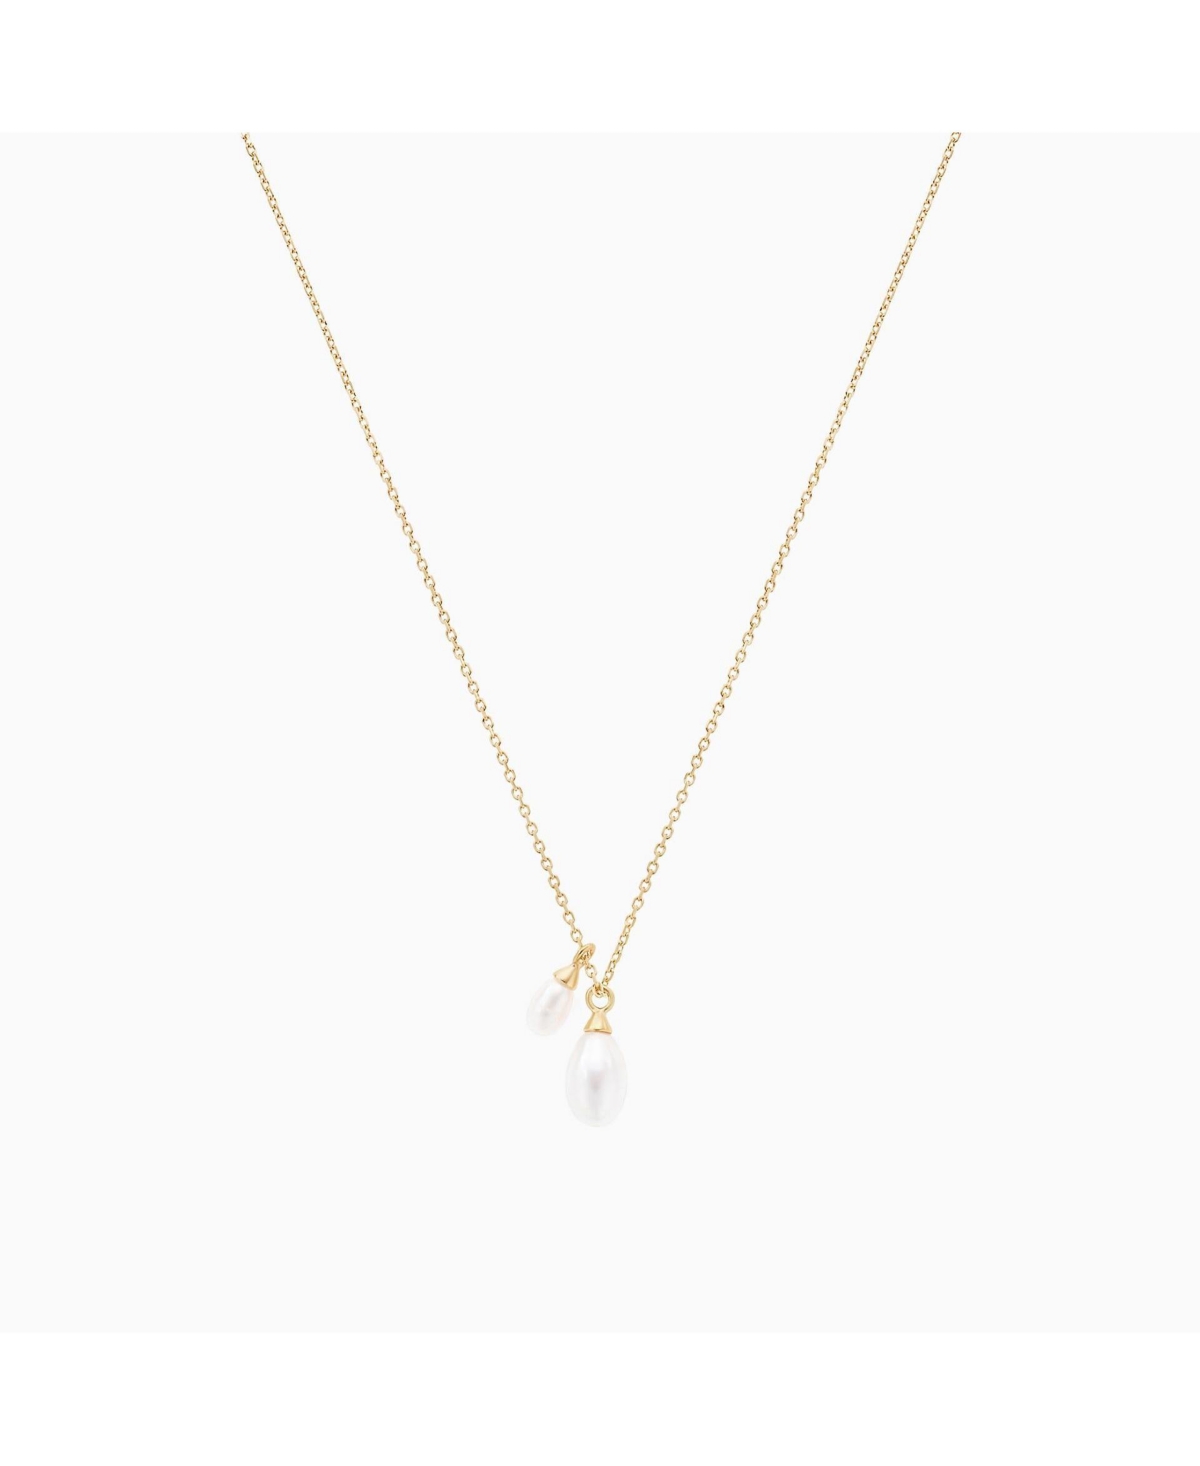 Maisie Duo Cultured Pearl Pendant Necklace - Gold